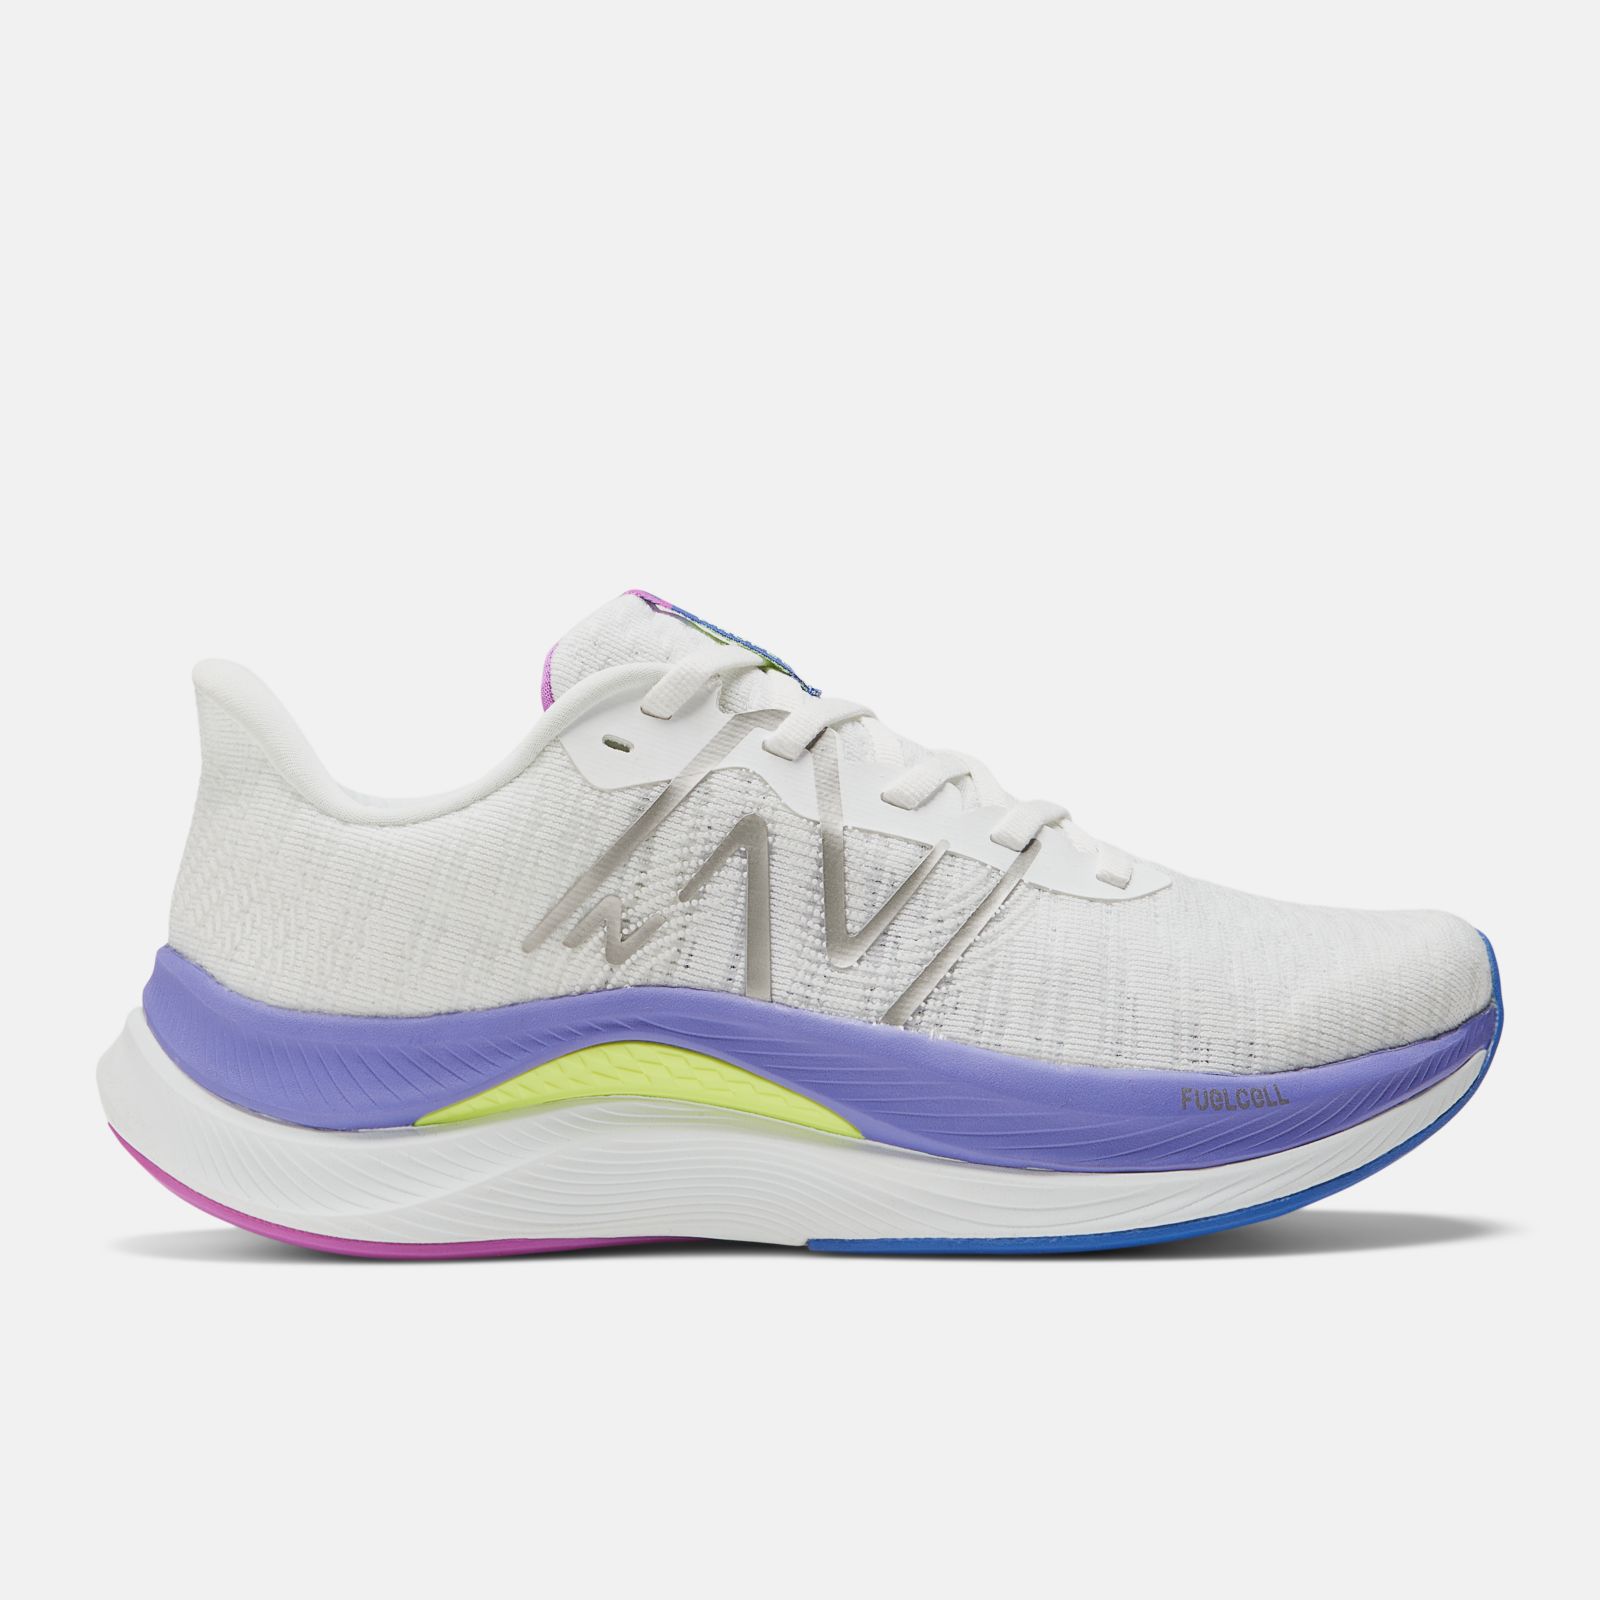 New Balance FuelCell Propel v4, White/Multi, swatch